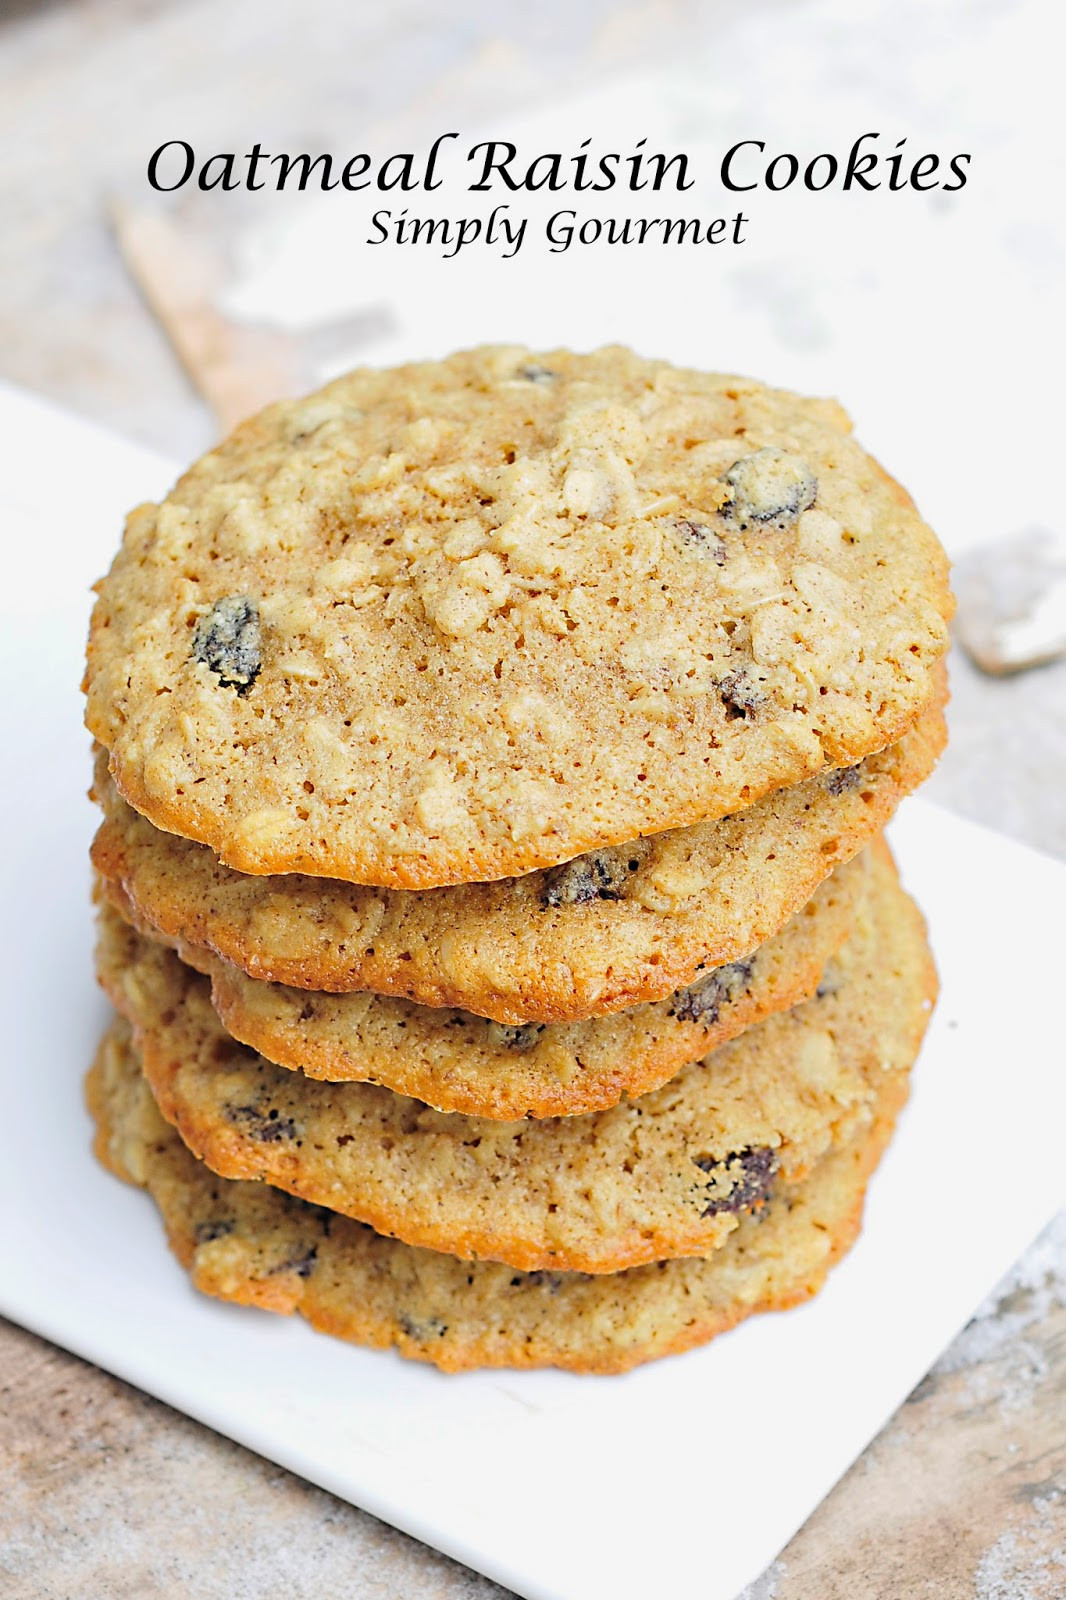 Gourmet Oatmeal Raisin Cookies Awesome Simply Gourmet Oatmeal Raisin Cookies Dairyfree